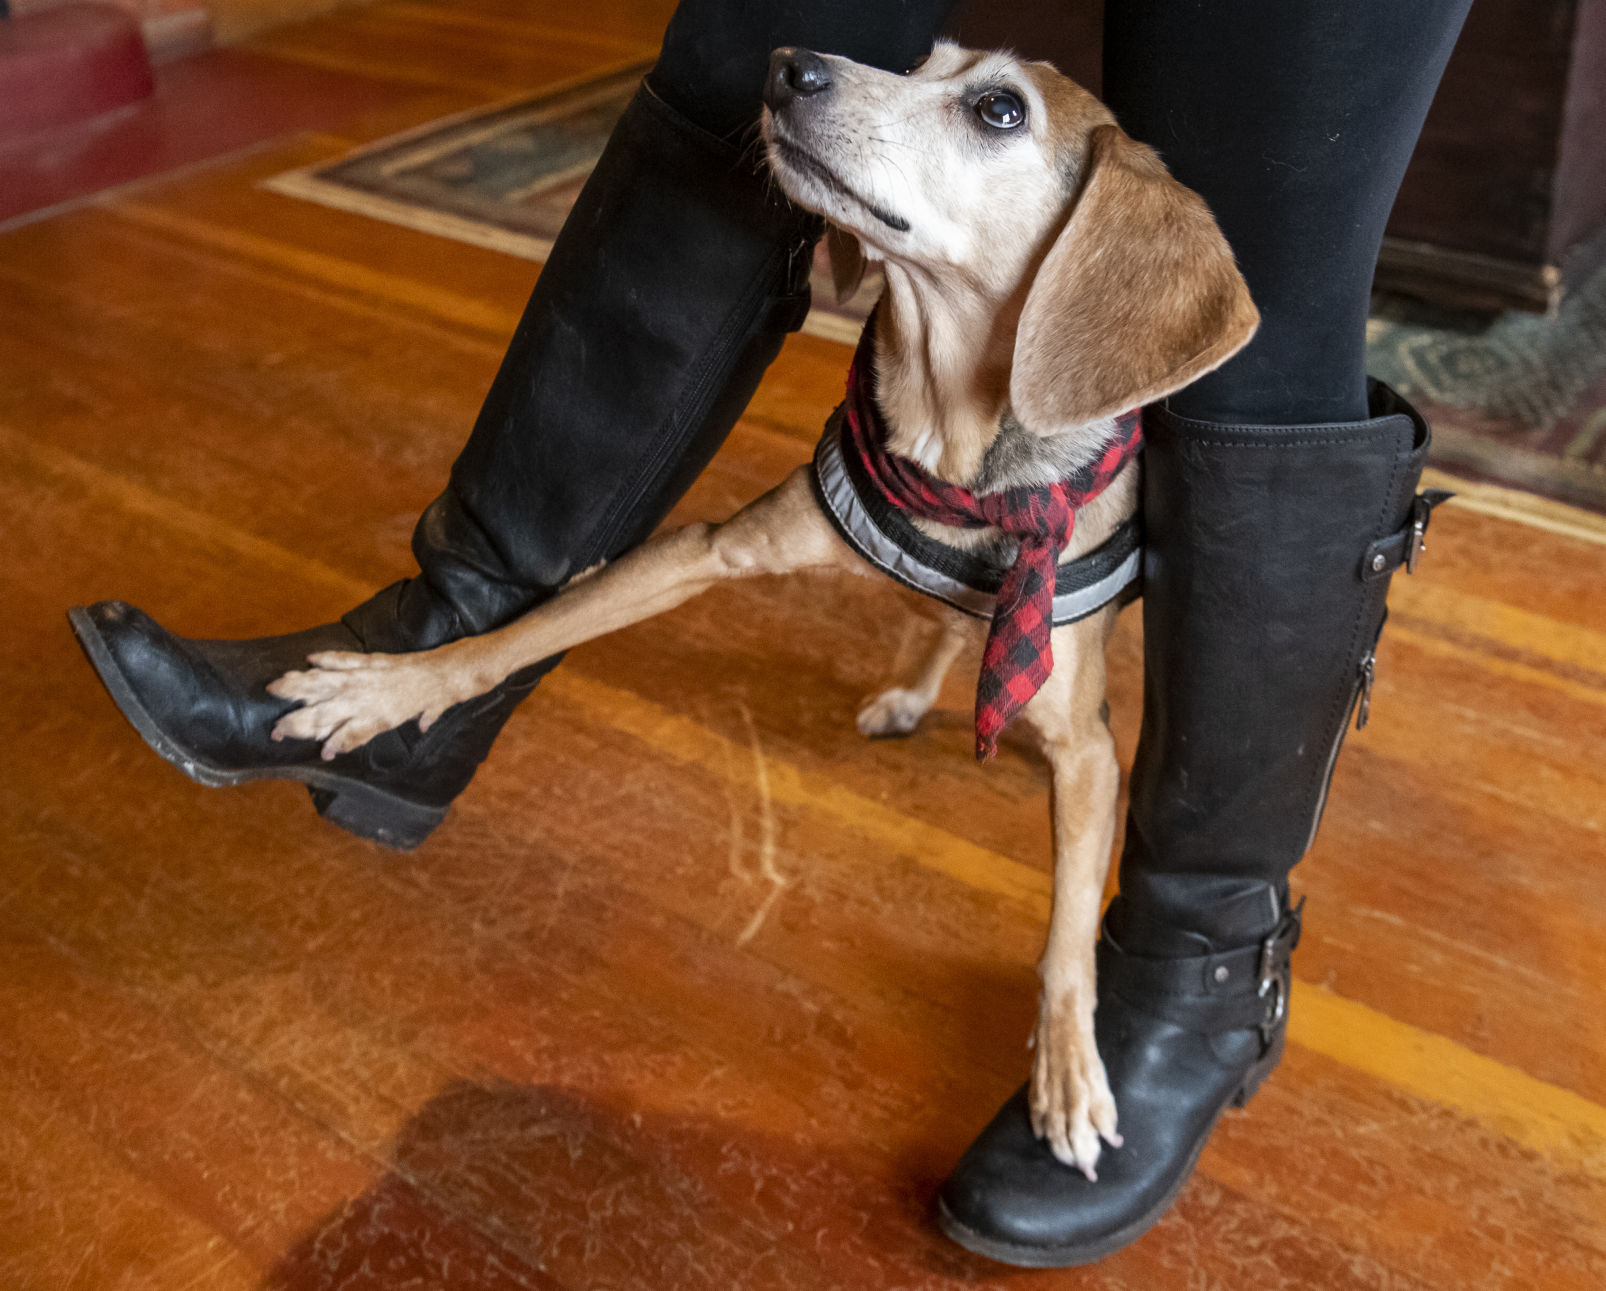 Beagle trained to do a trick between trainer's legs